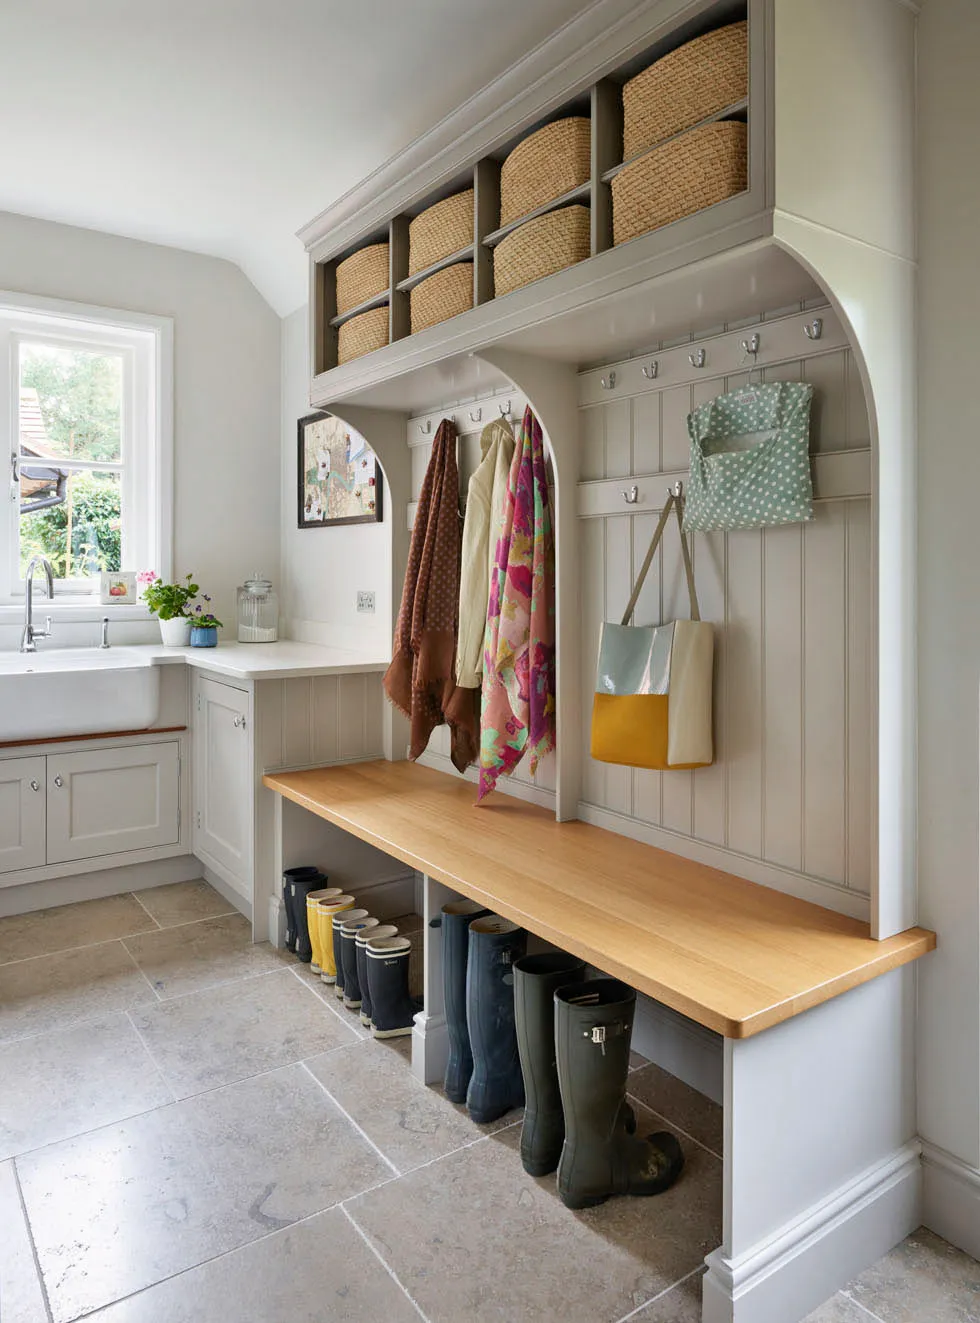 This project by Martin Moore incorporates the twin virtues of the boot room and the laundry room, with space to sit down while putting on and removing shoes.